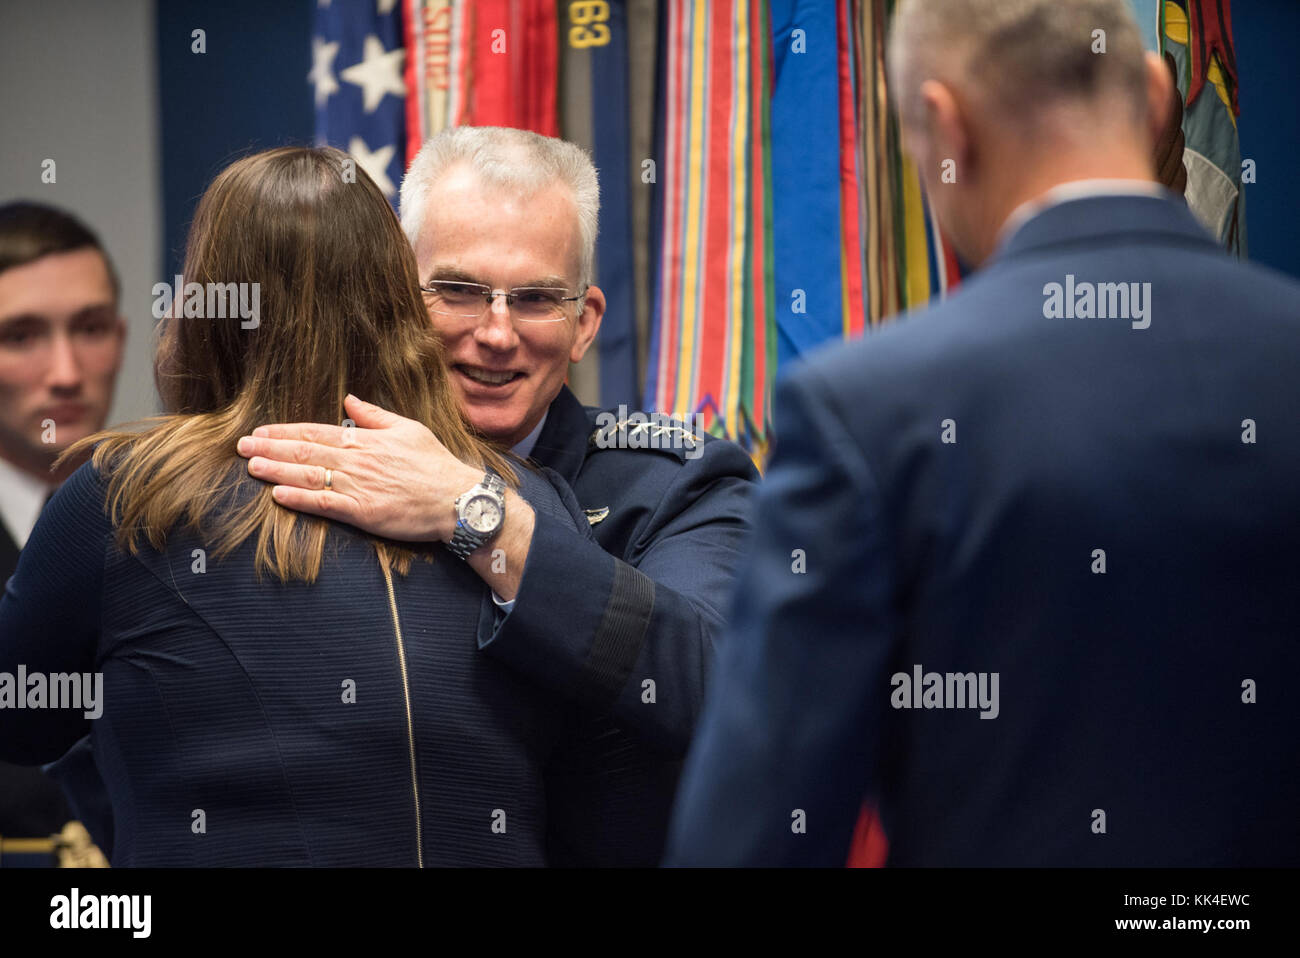 U.S. Air Force Gen. Paul J. Selva, Vice Chairman of the Joint Chiefs of Staff, greets Ann O' Connor, accepting on behalf of Trees for Troops - the U.S. Coast Guard awardee, during the 2017 Spirit of Hope Awards at the Hall of Heroes in the Pentagon, Oct. 26, 2017. The Spirit of Hope Award is awarded to men and women of the U.S. Armed Forces, entertainers, and other distinguished Americans and organizations whose patriotism and service reflect that of Mr. Bob Hope. The recipients selflessly contributed an extraordinary amount of time, talent, or resources to significantly enhance the quality of Stock Photo